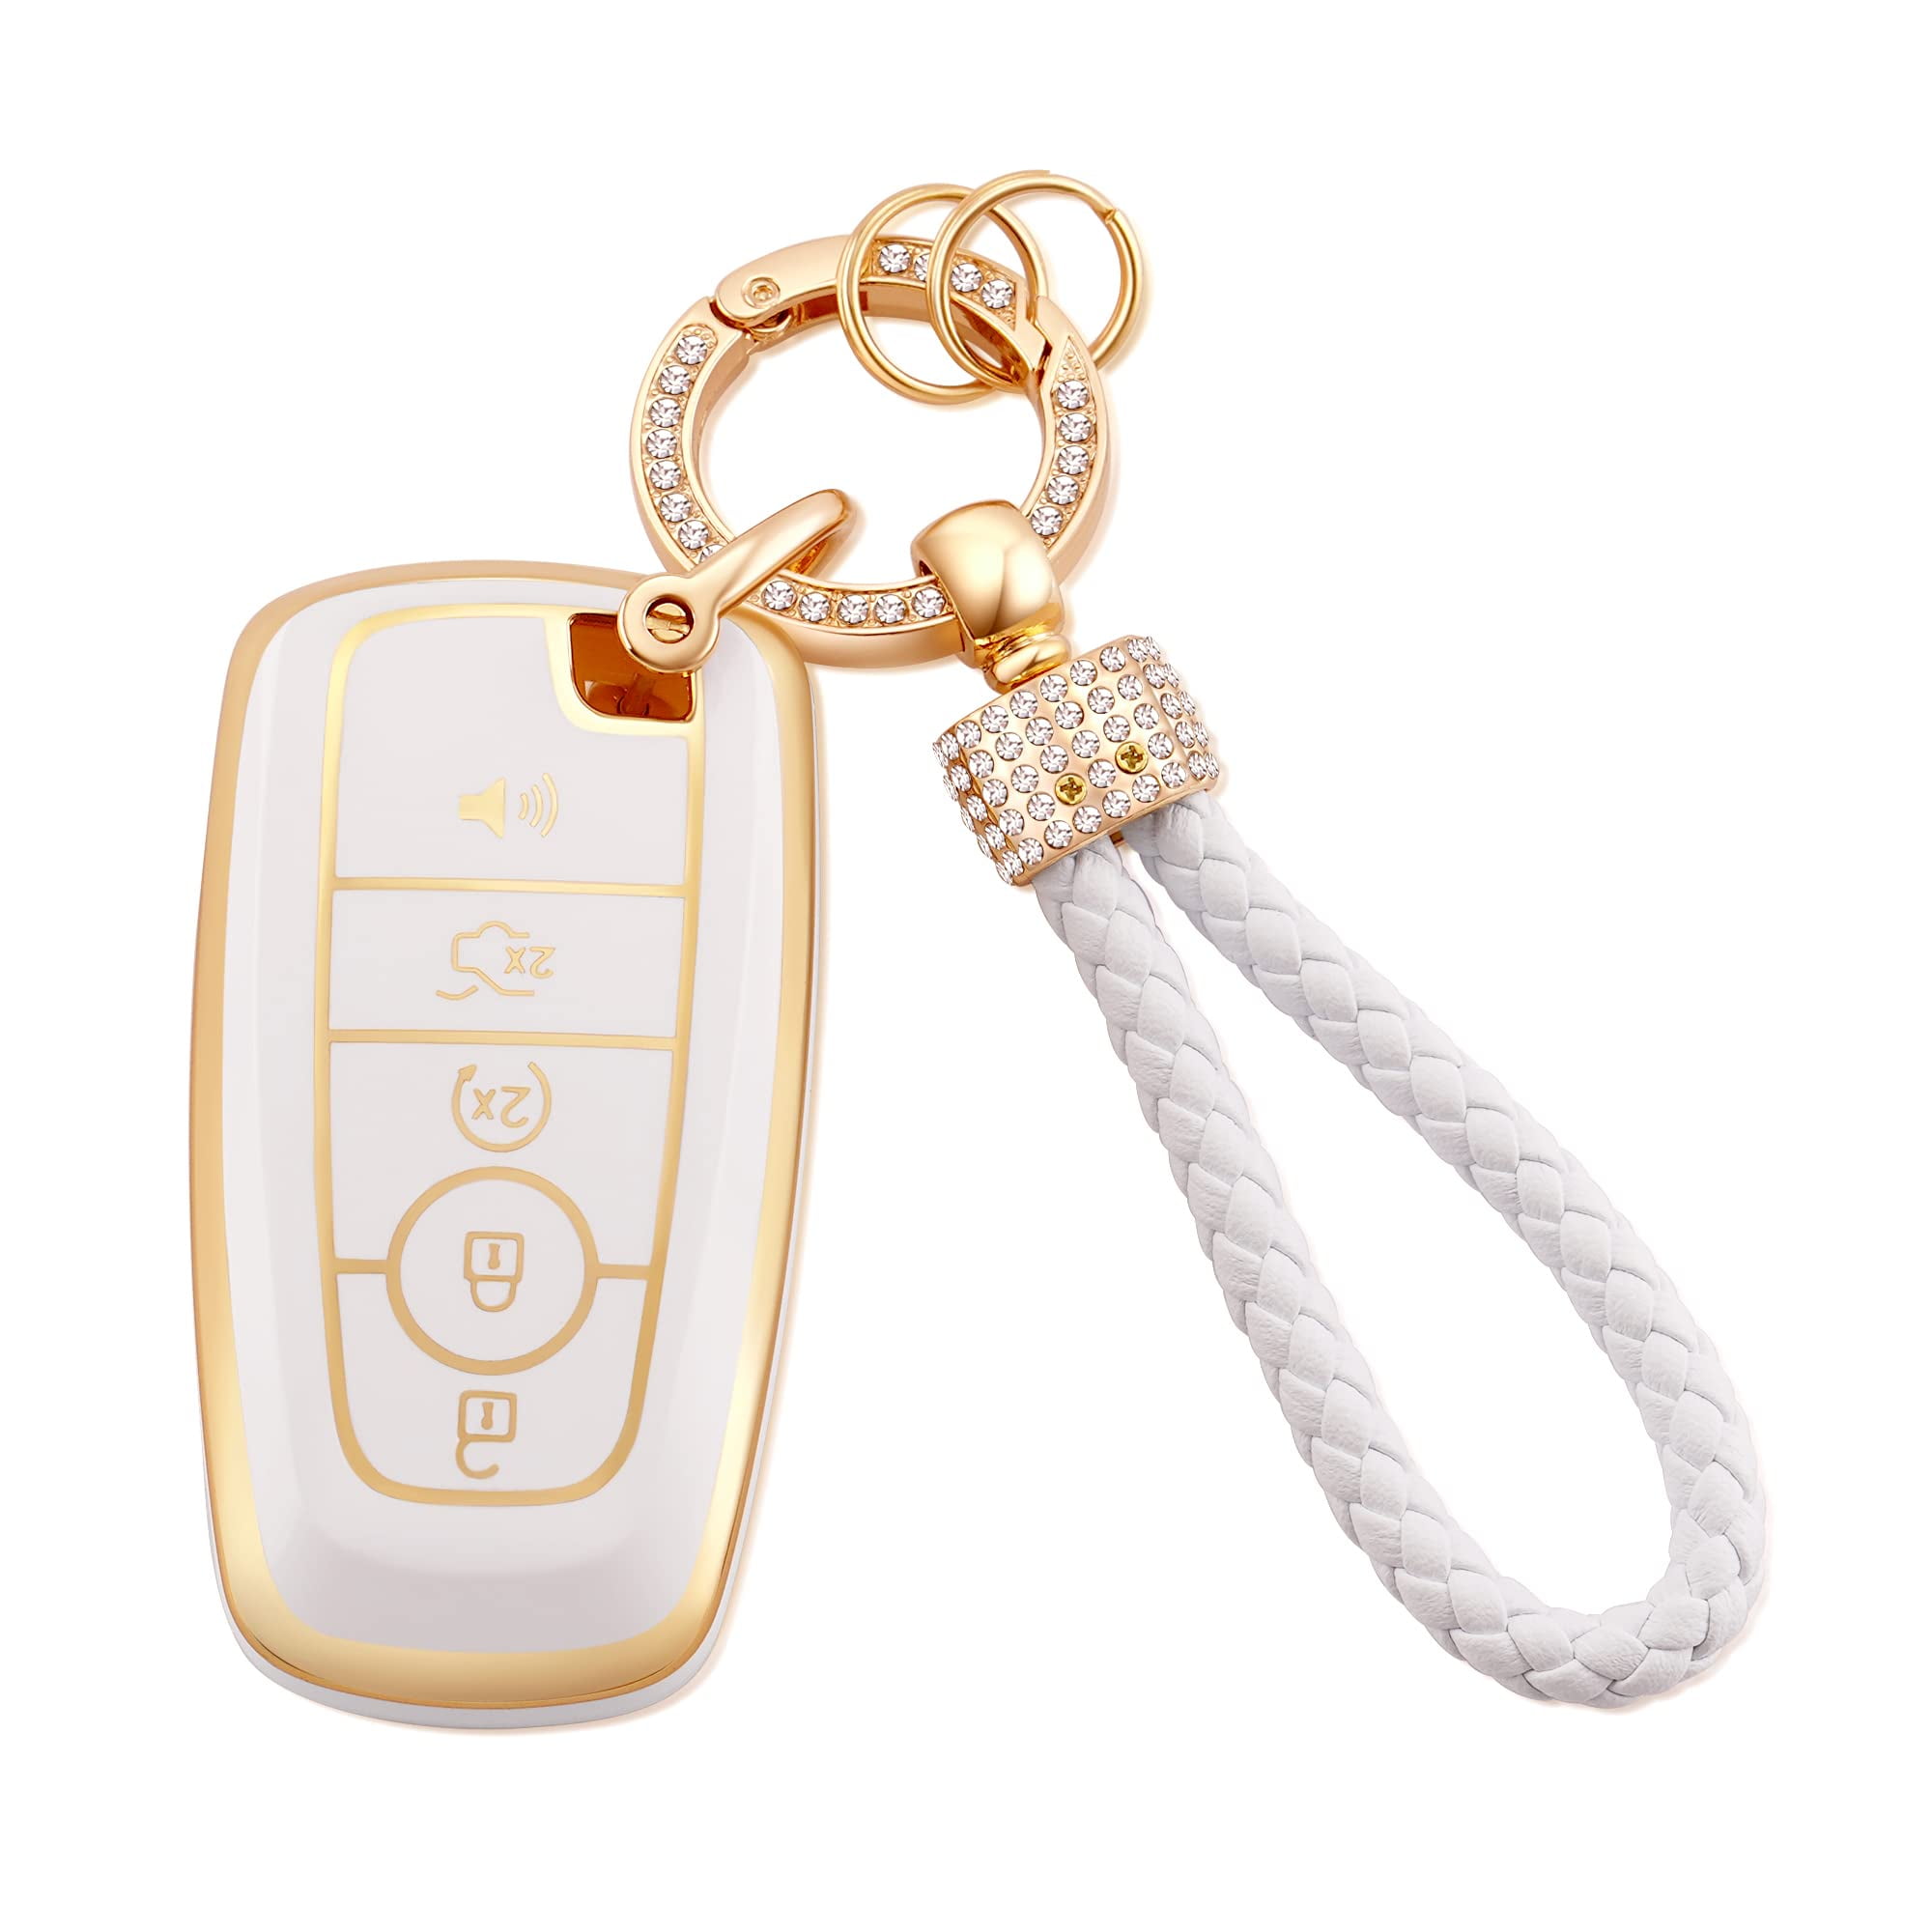 EKALA for Ford Key Fob Cover with Keychain Lanyard, 5 Buttons Soft TPU Keys  Shells Girly White Key Fob Cover Compatible with Ford Explorer Fusion  Mustang F150 Edge Escape Expedition Lincoln( 